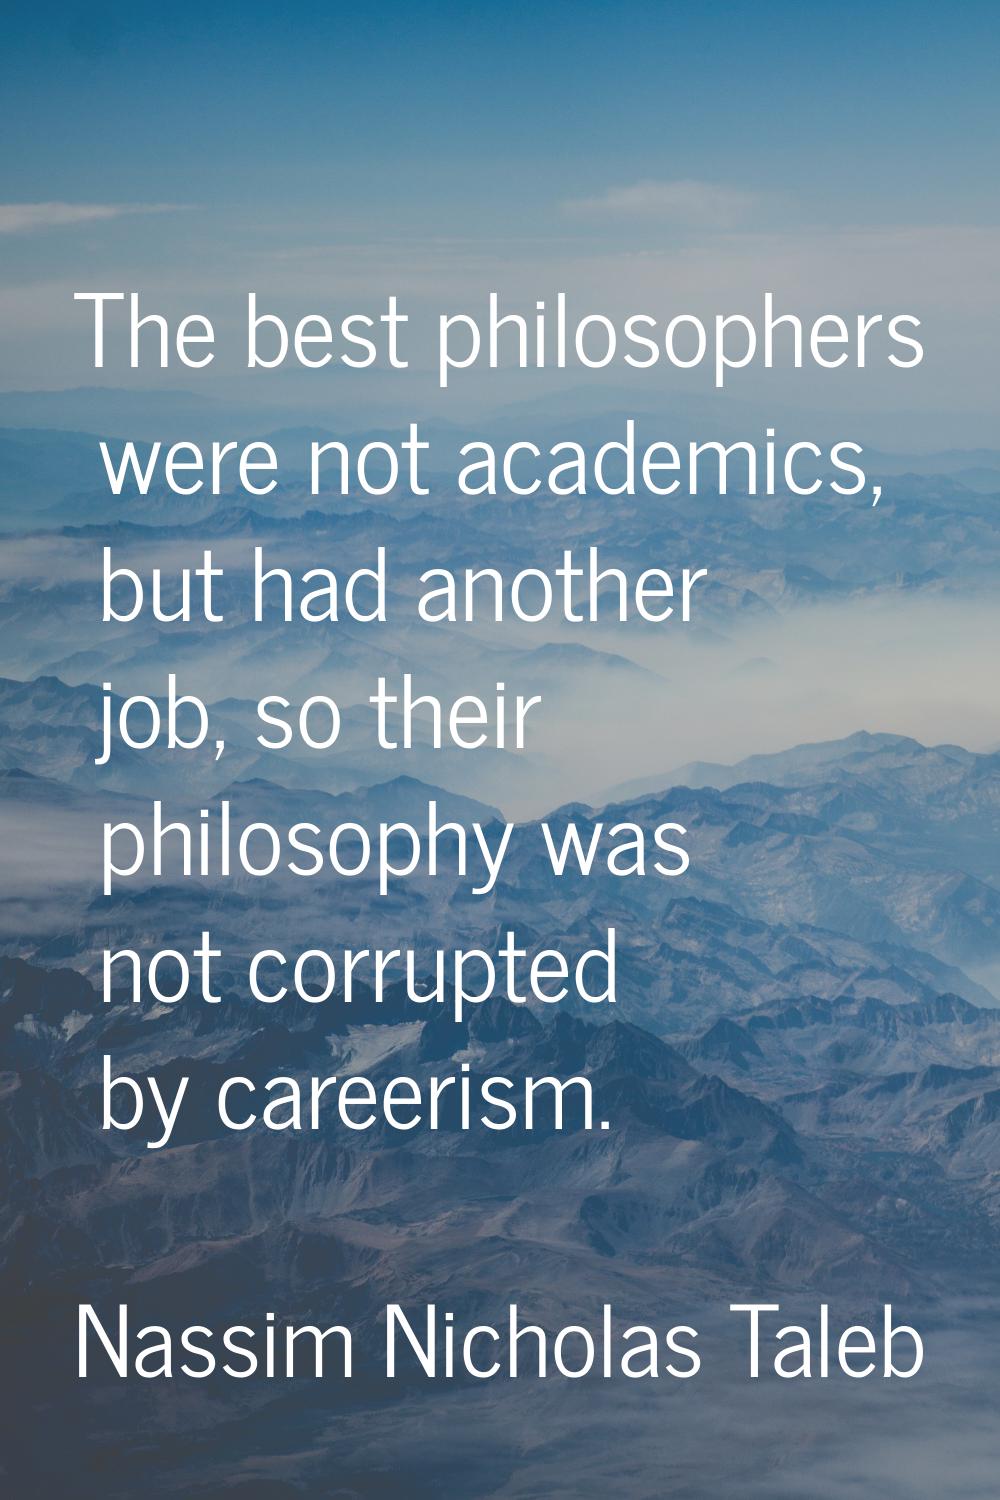 The best philosophers were not academics, but had another job, so their philosophy was not corrupte